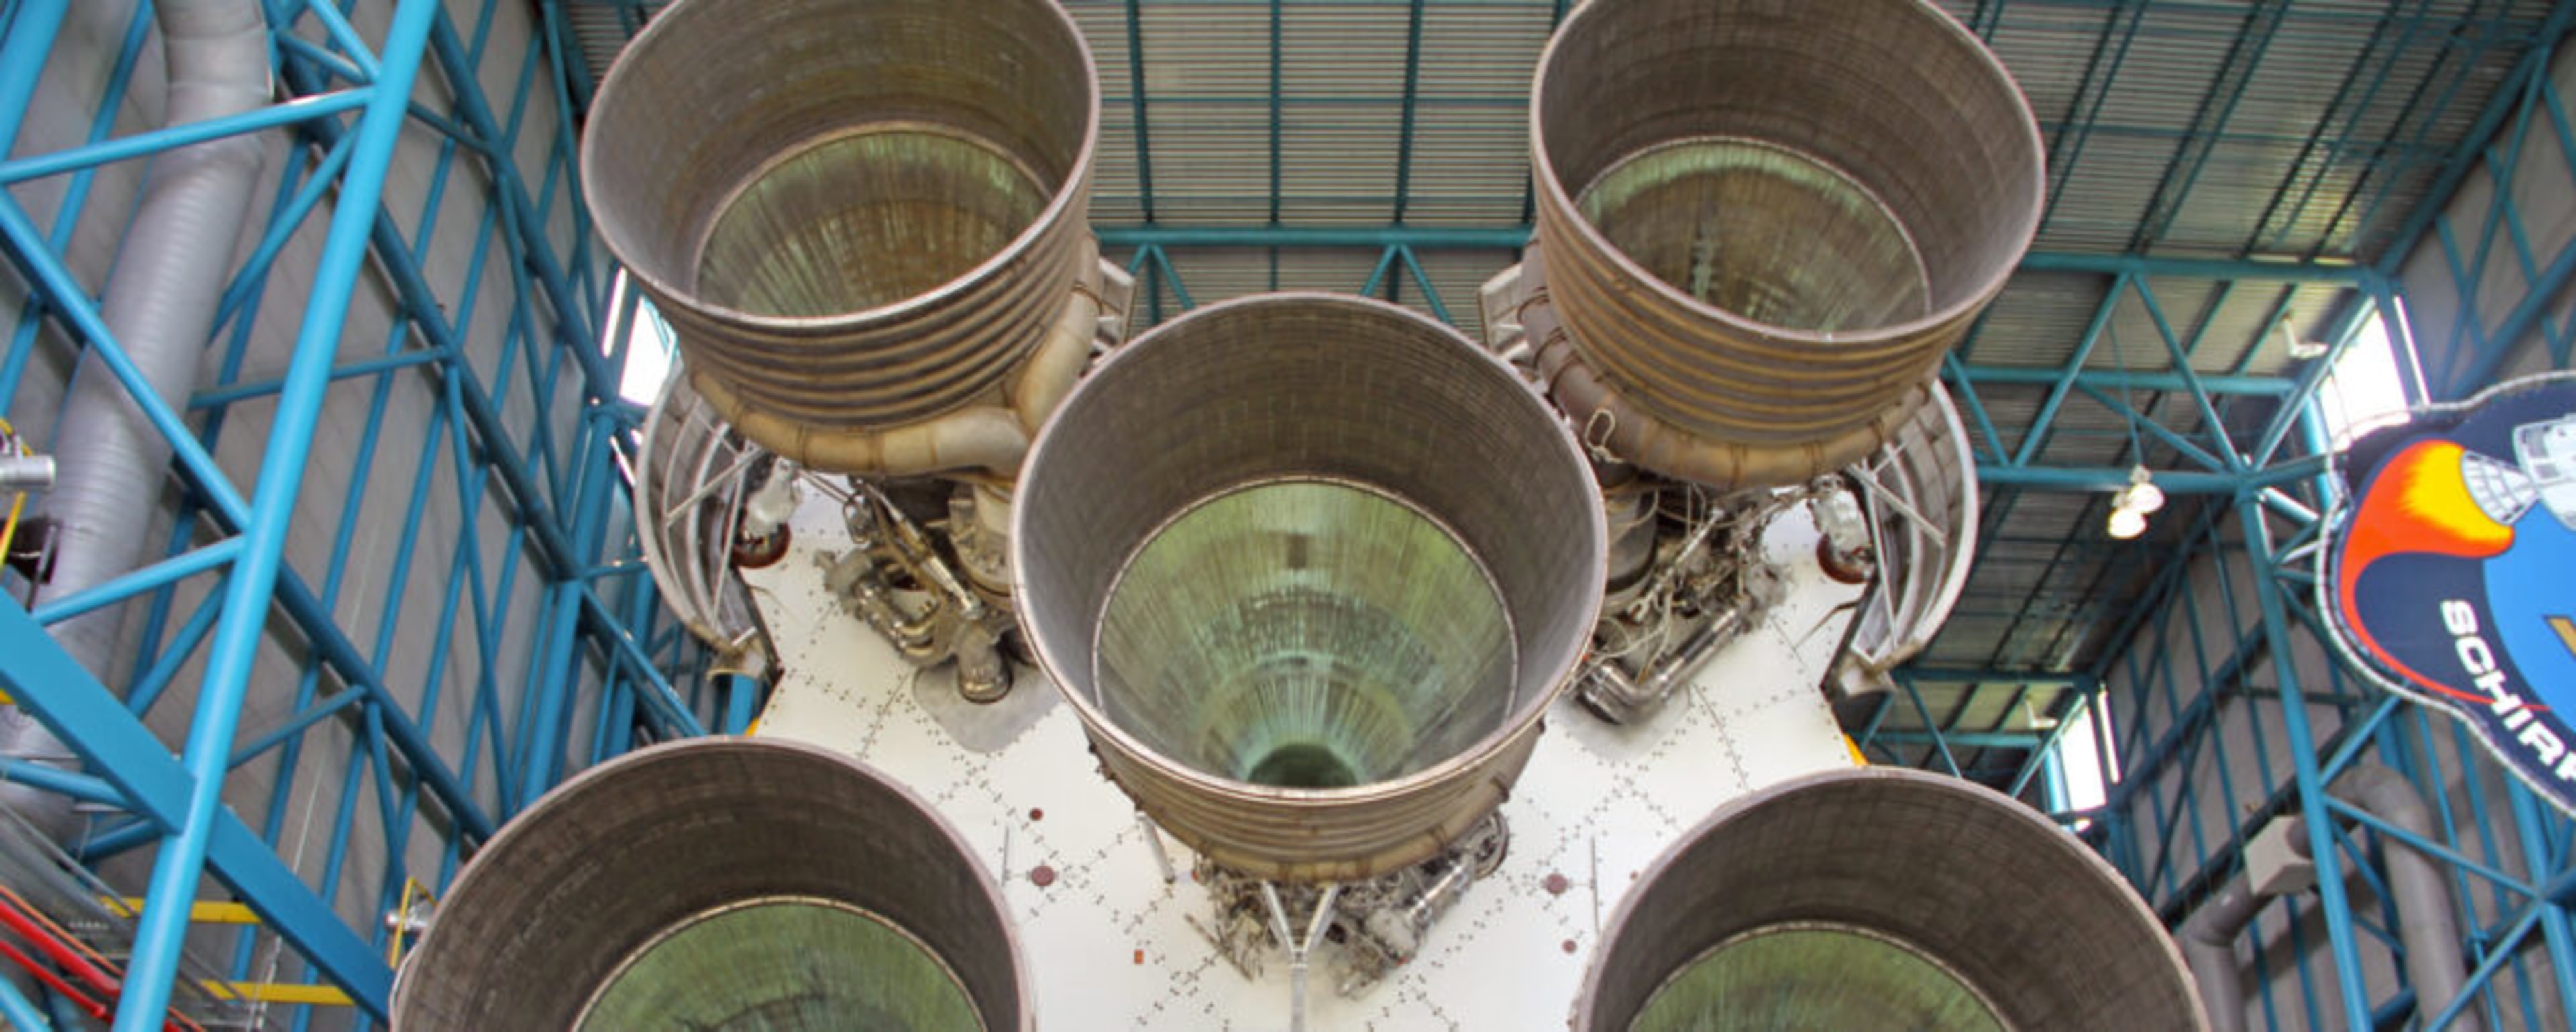 Thrusters of a rocket symbolizing the acceleration of software development through continuous delivery